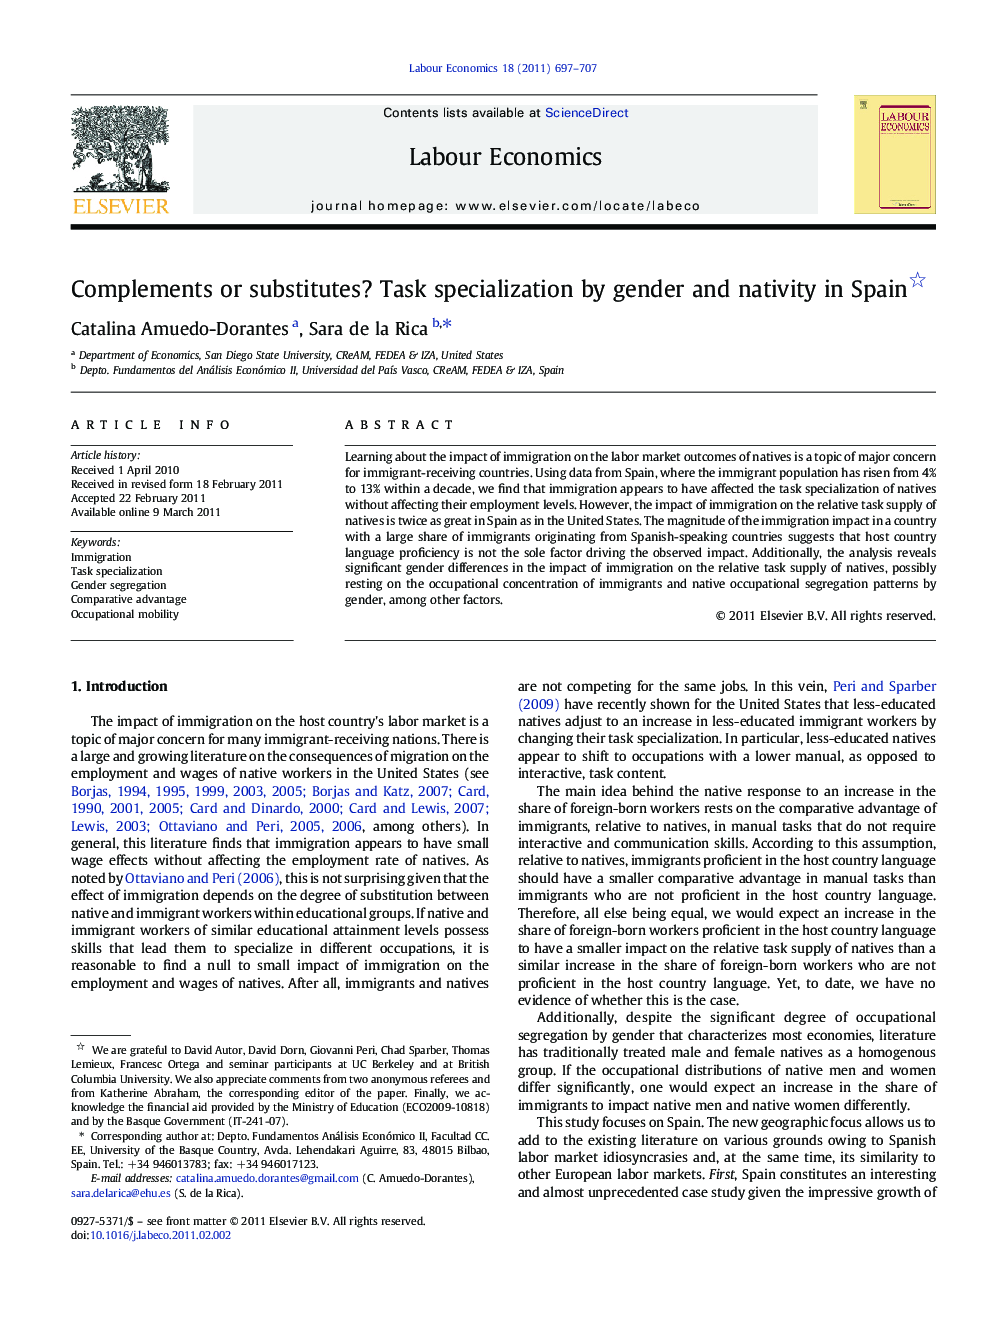 Complements or substitutes? Task specialization by gender and nativity in Spain 